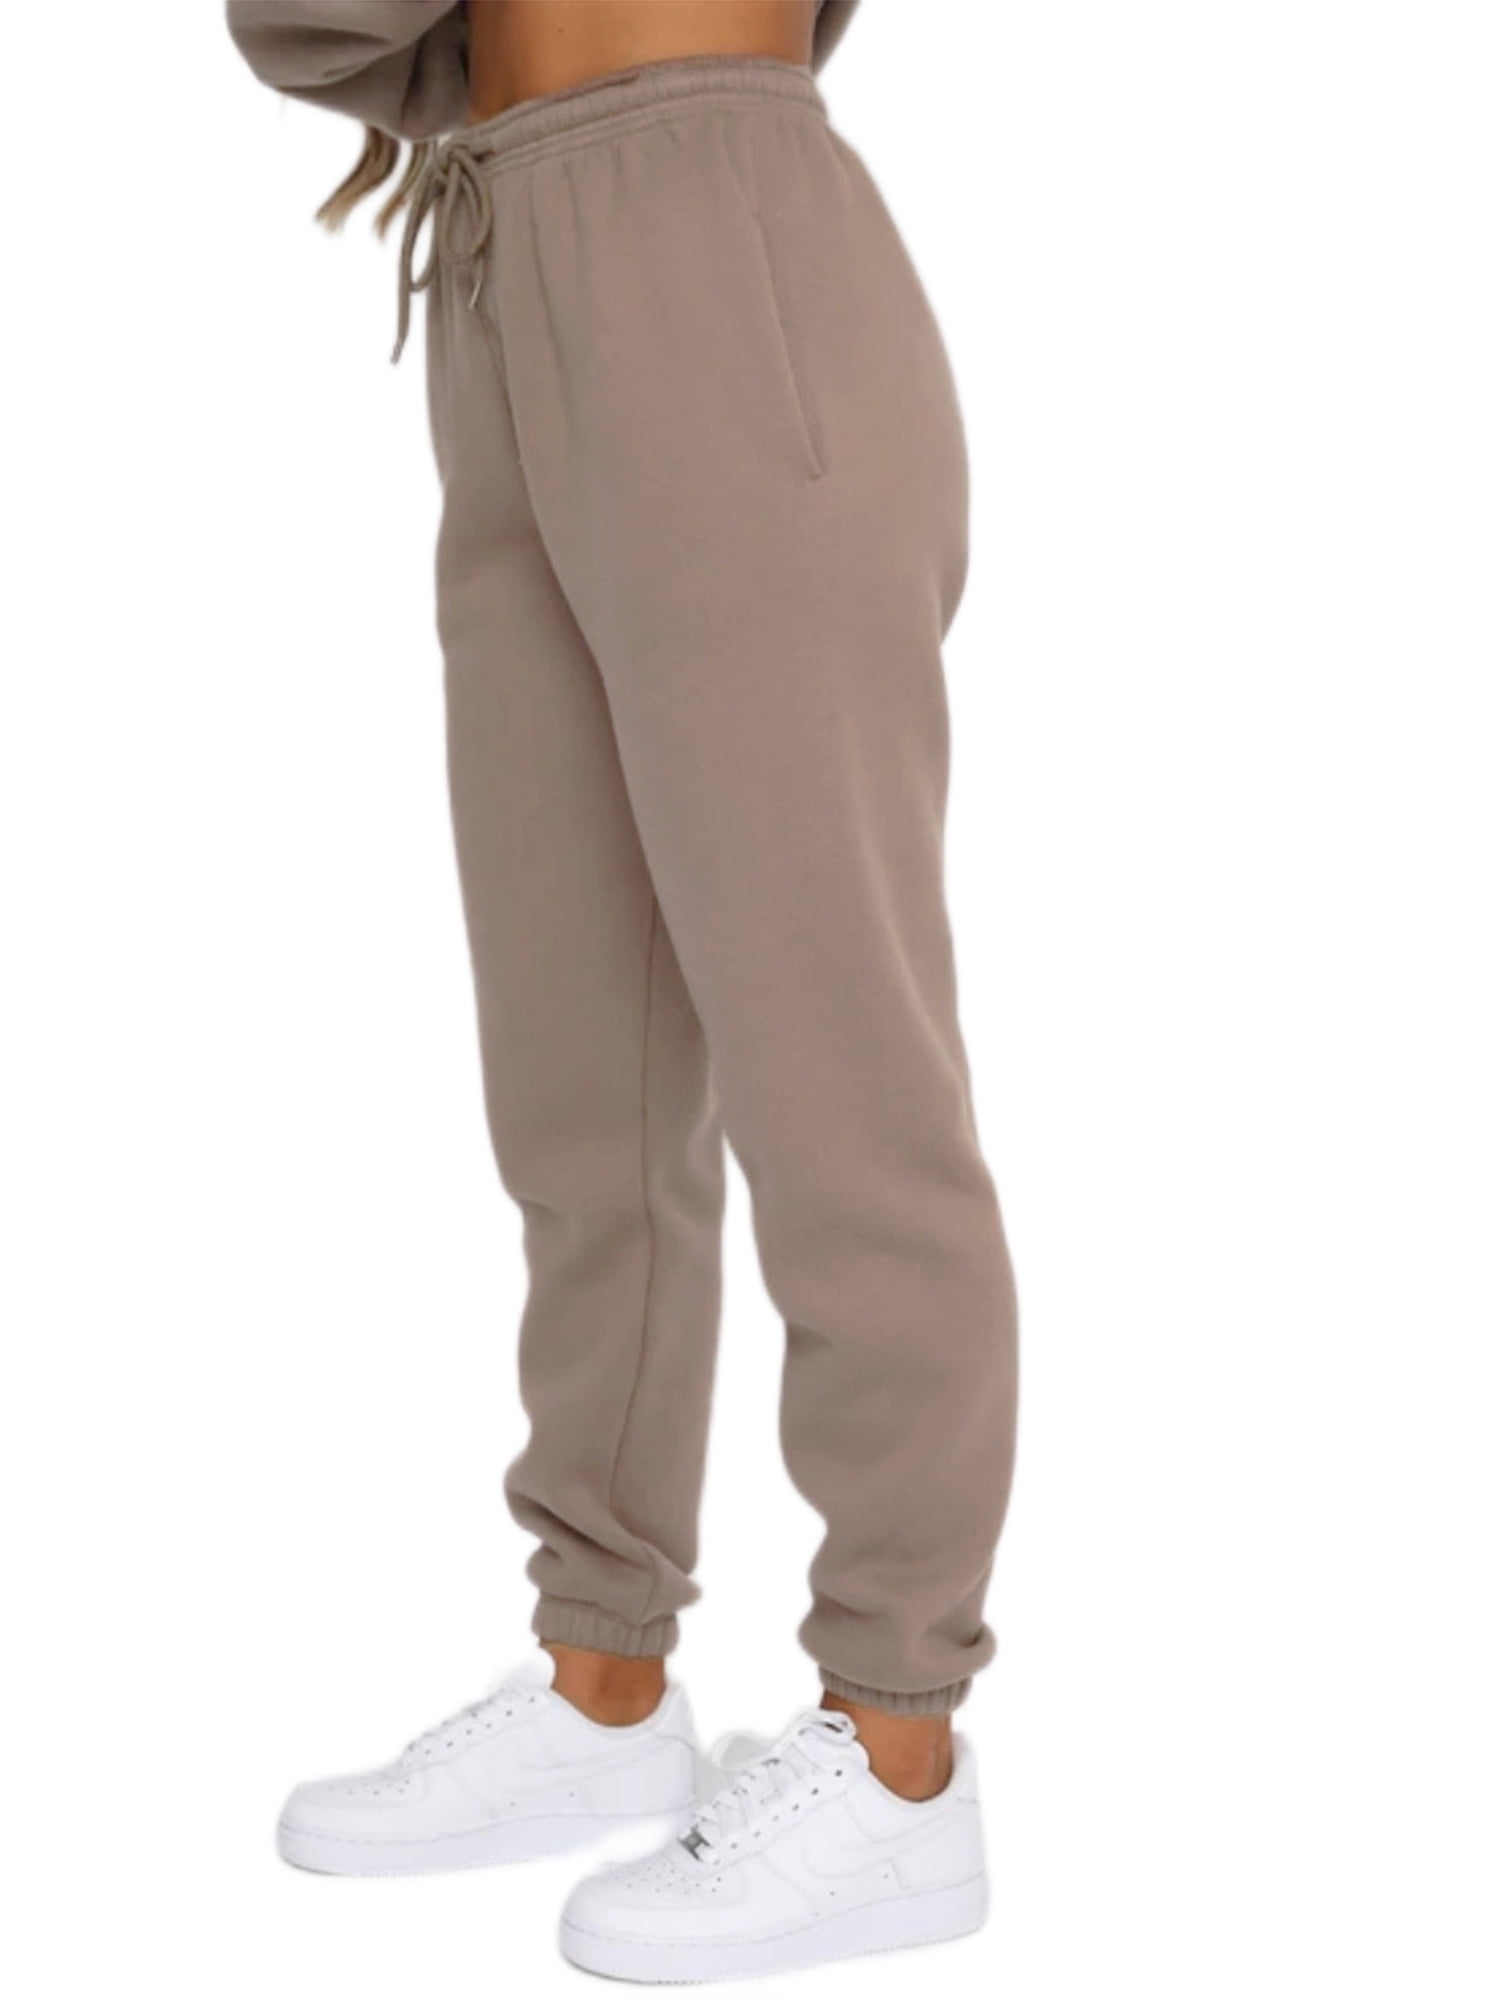 Cindysus Ladies Jogger Set Elastic Waist Sweatsuits Long Sleeve Two Piece  Outfit Running Sweatshirts And Sweatpants Thick Lounge Sets Khaki XL 